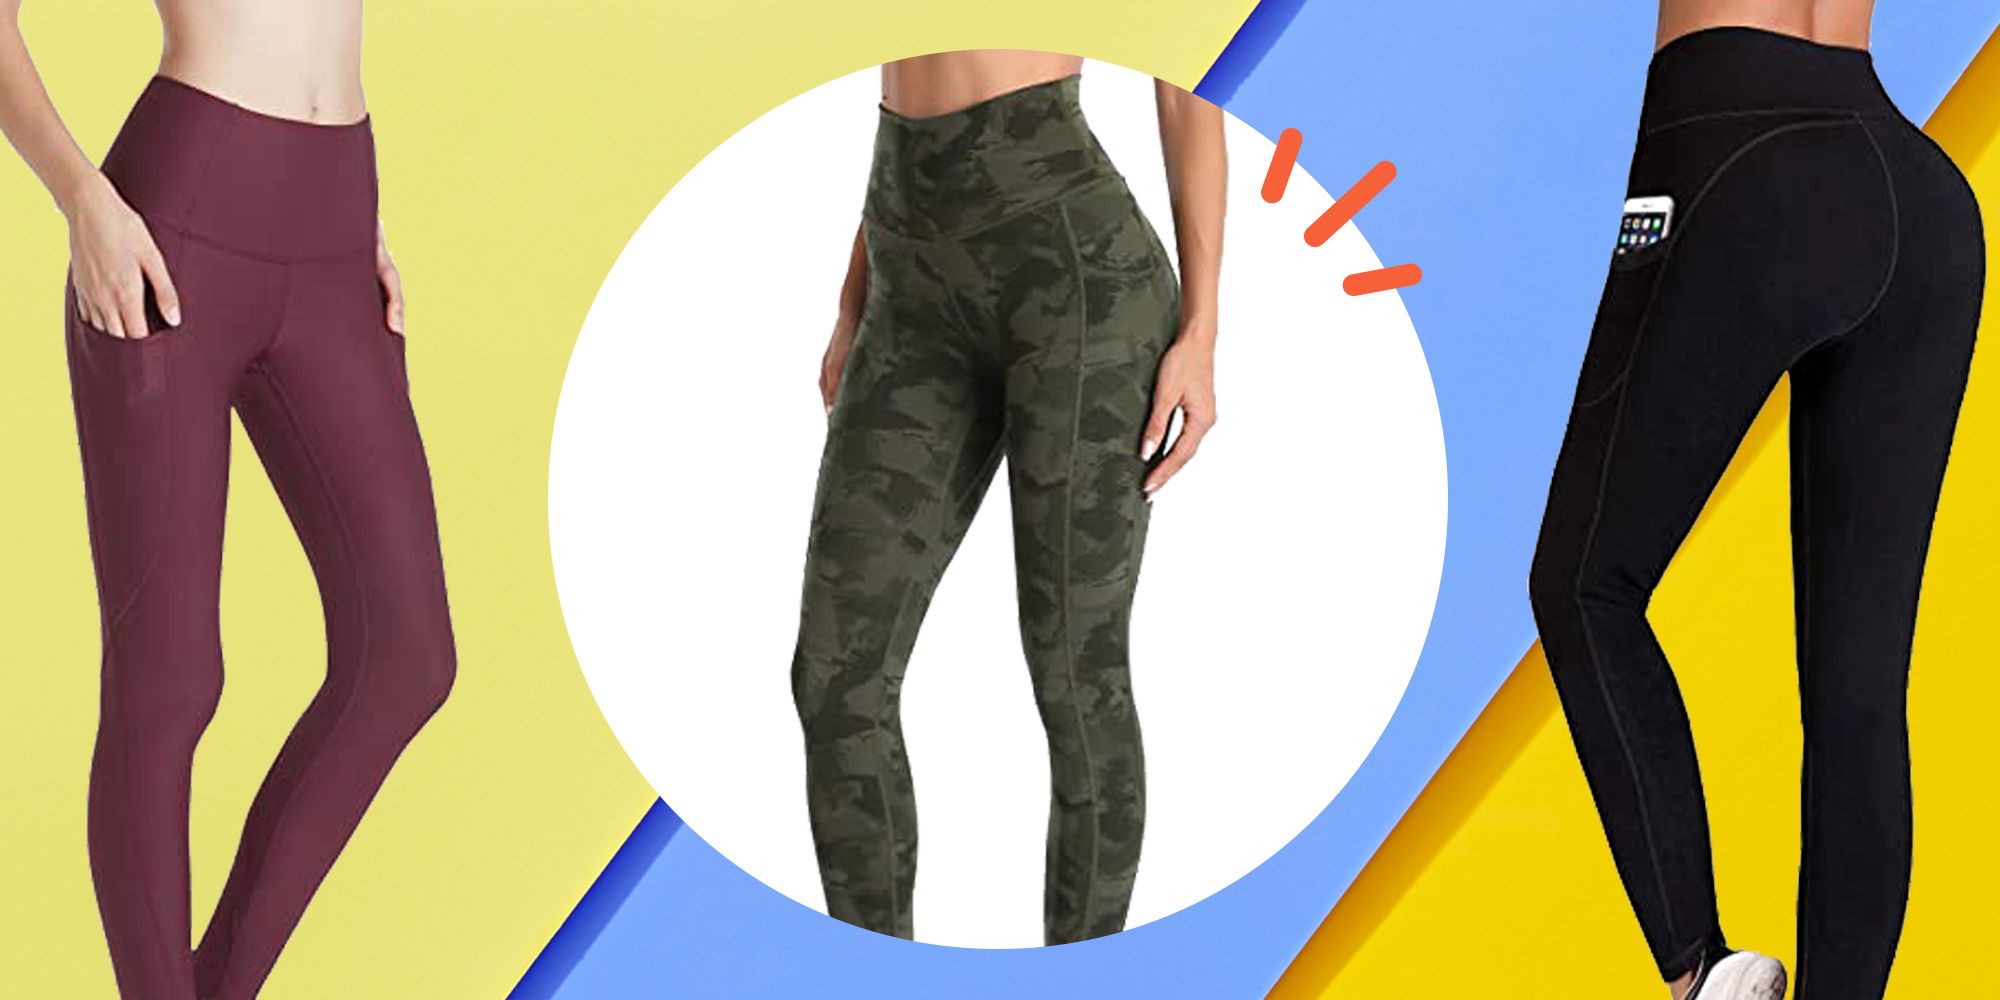 Butter Soft Yoga Pants for Women-Casual Comfortable Basic Workout Leggings